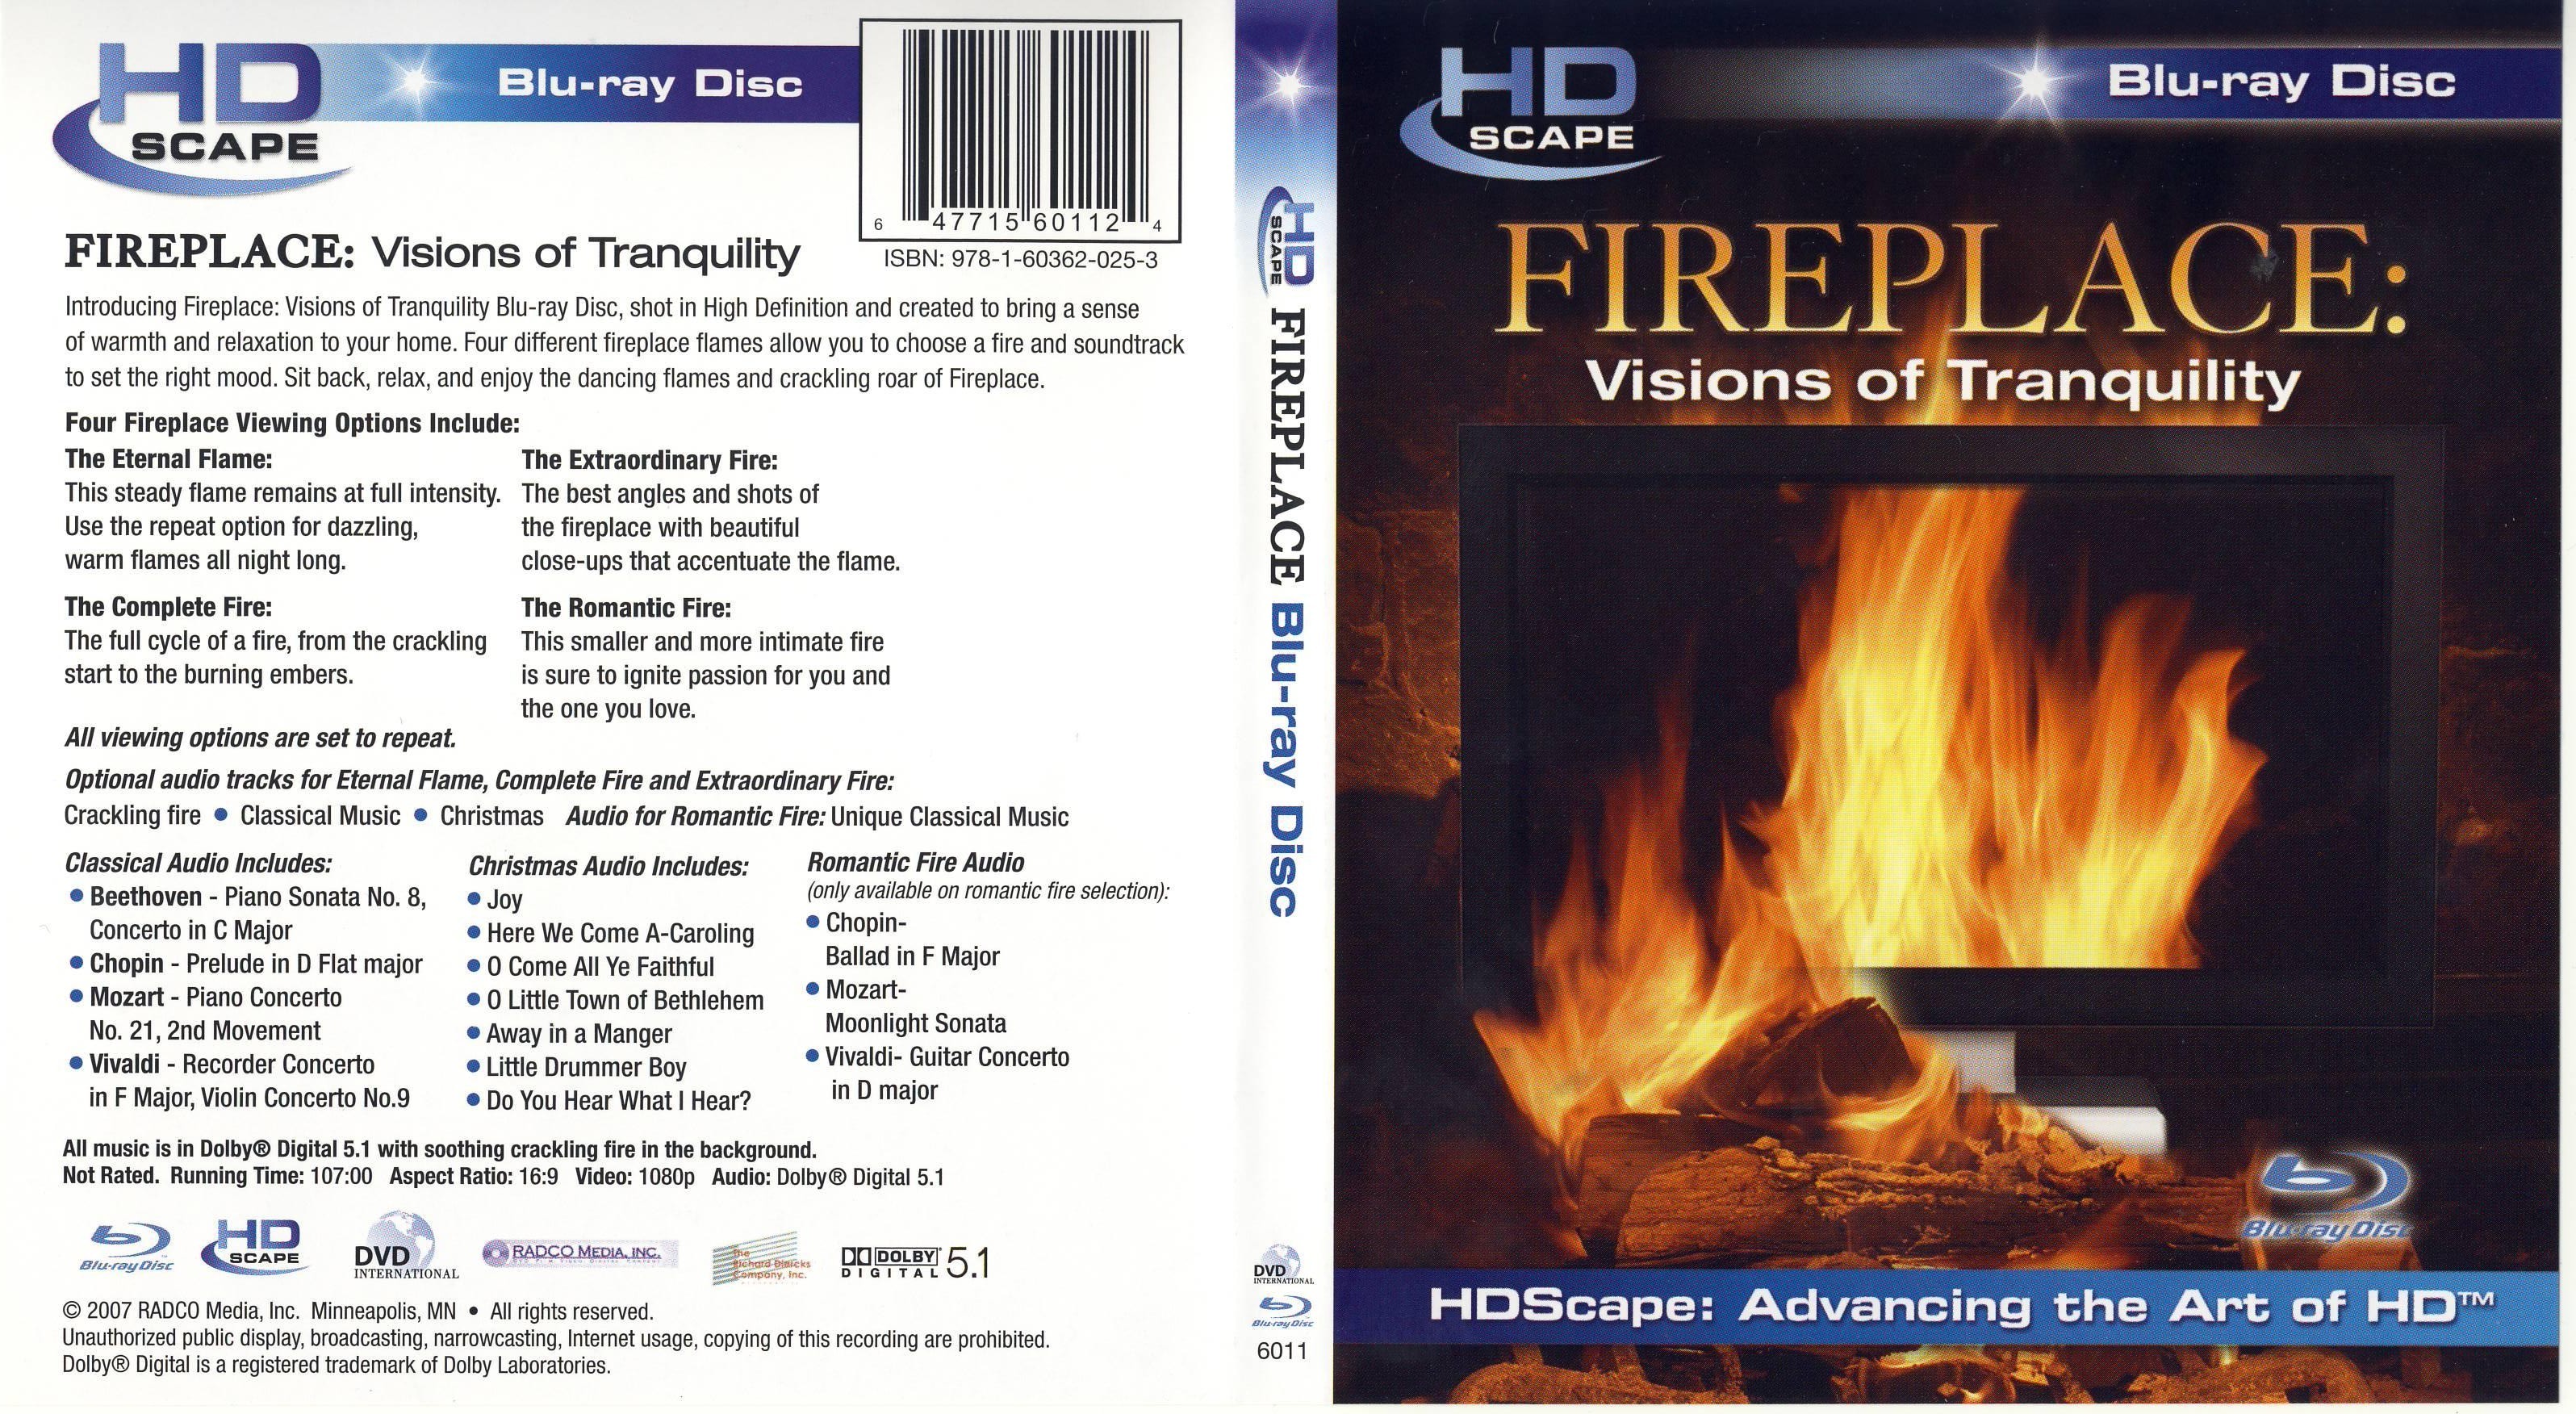 Jaquette DVD Fireplace Visions Of Tranquility Zone 1 (BLU-RAY)